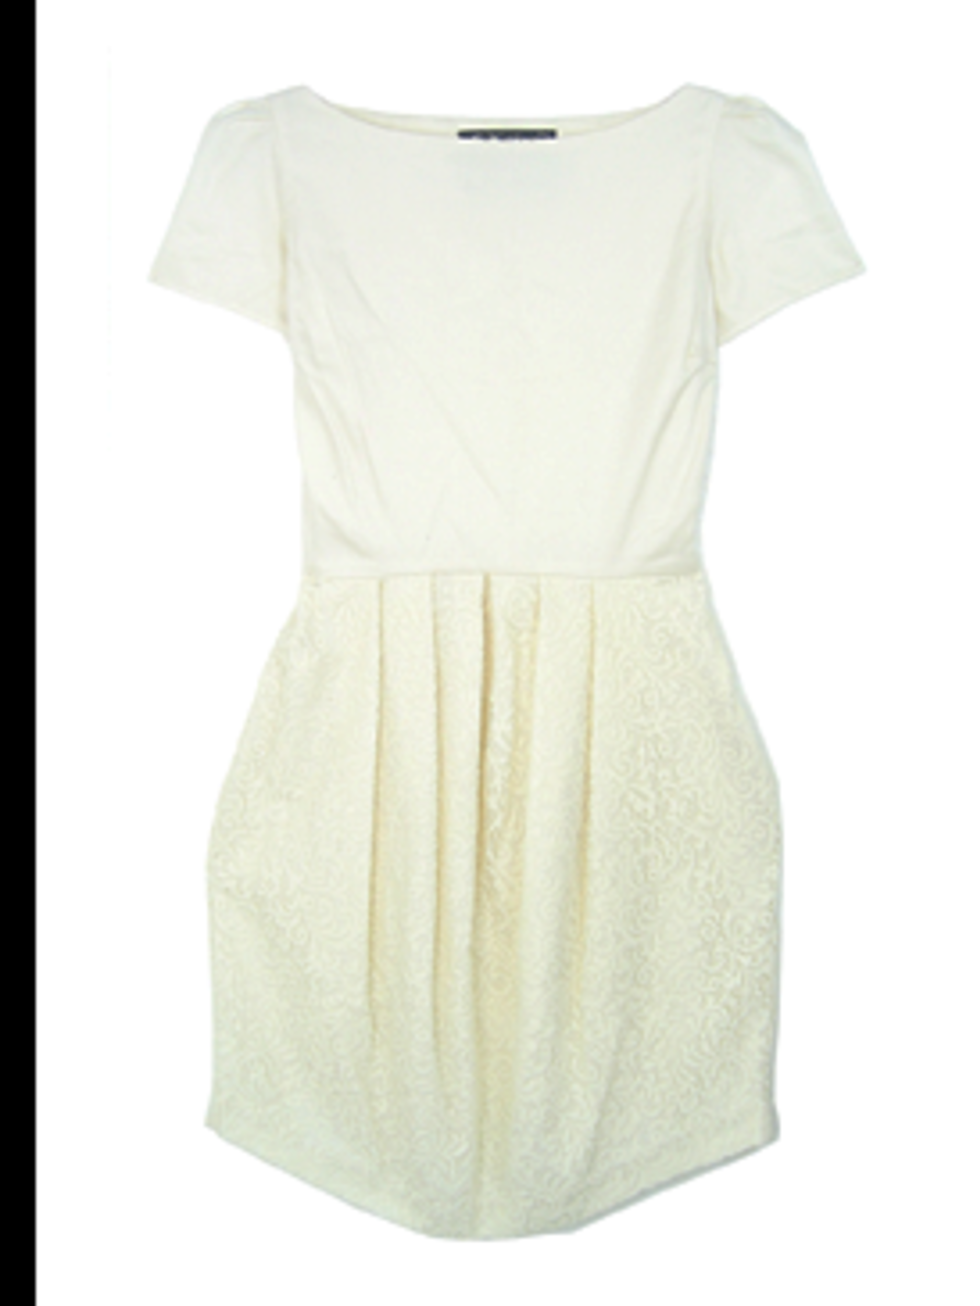 <p>Lace dress, £250 by Minna at <a href="http://www.fashion-conscience.com/">eco-friendly clothes boutique Fashion Conscience</a></p>